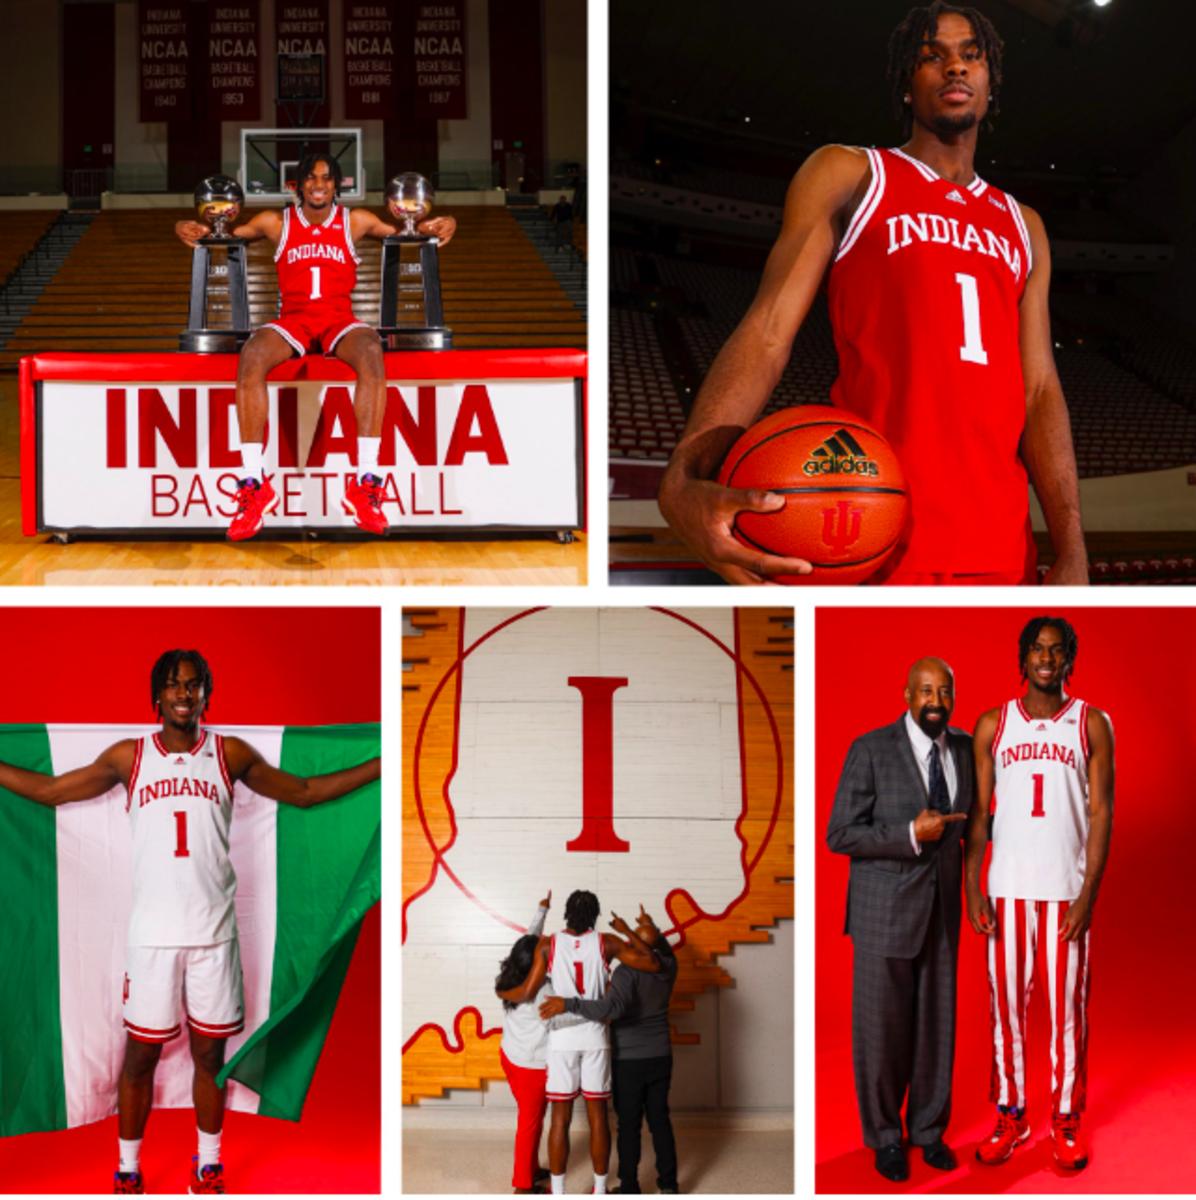 Mackenzie Mgbako, a five-star recruit in the class of 2023, dons an Indiana uniform during his visit over the weekend.